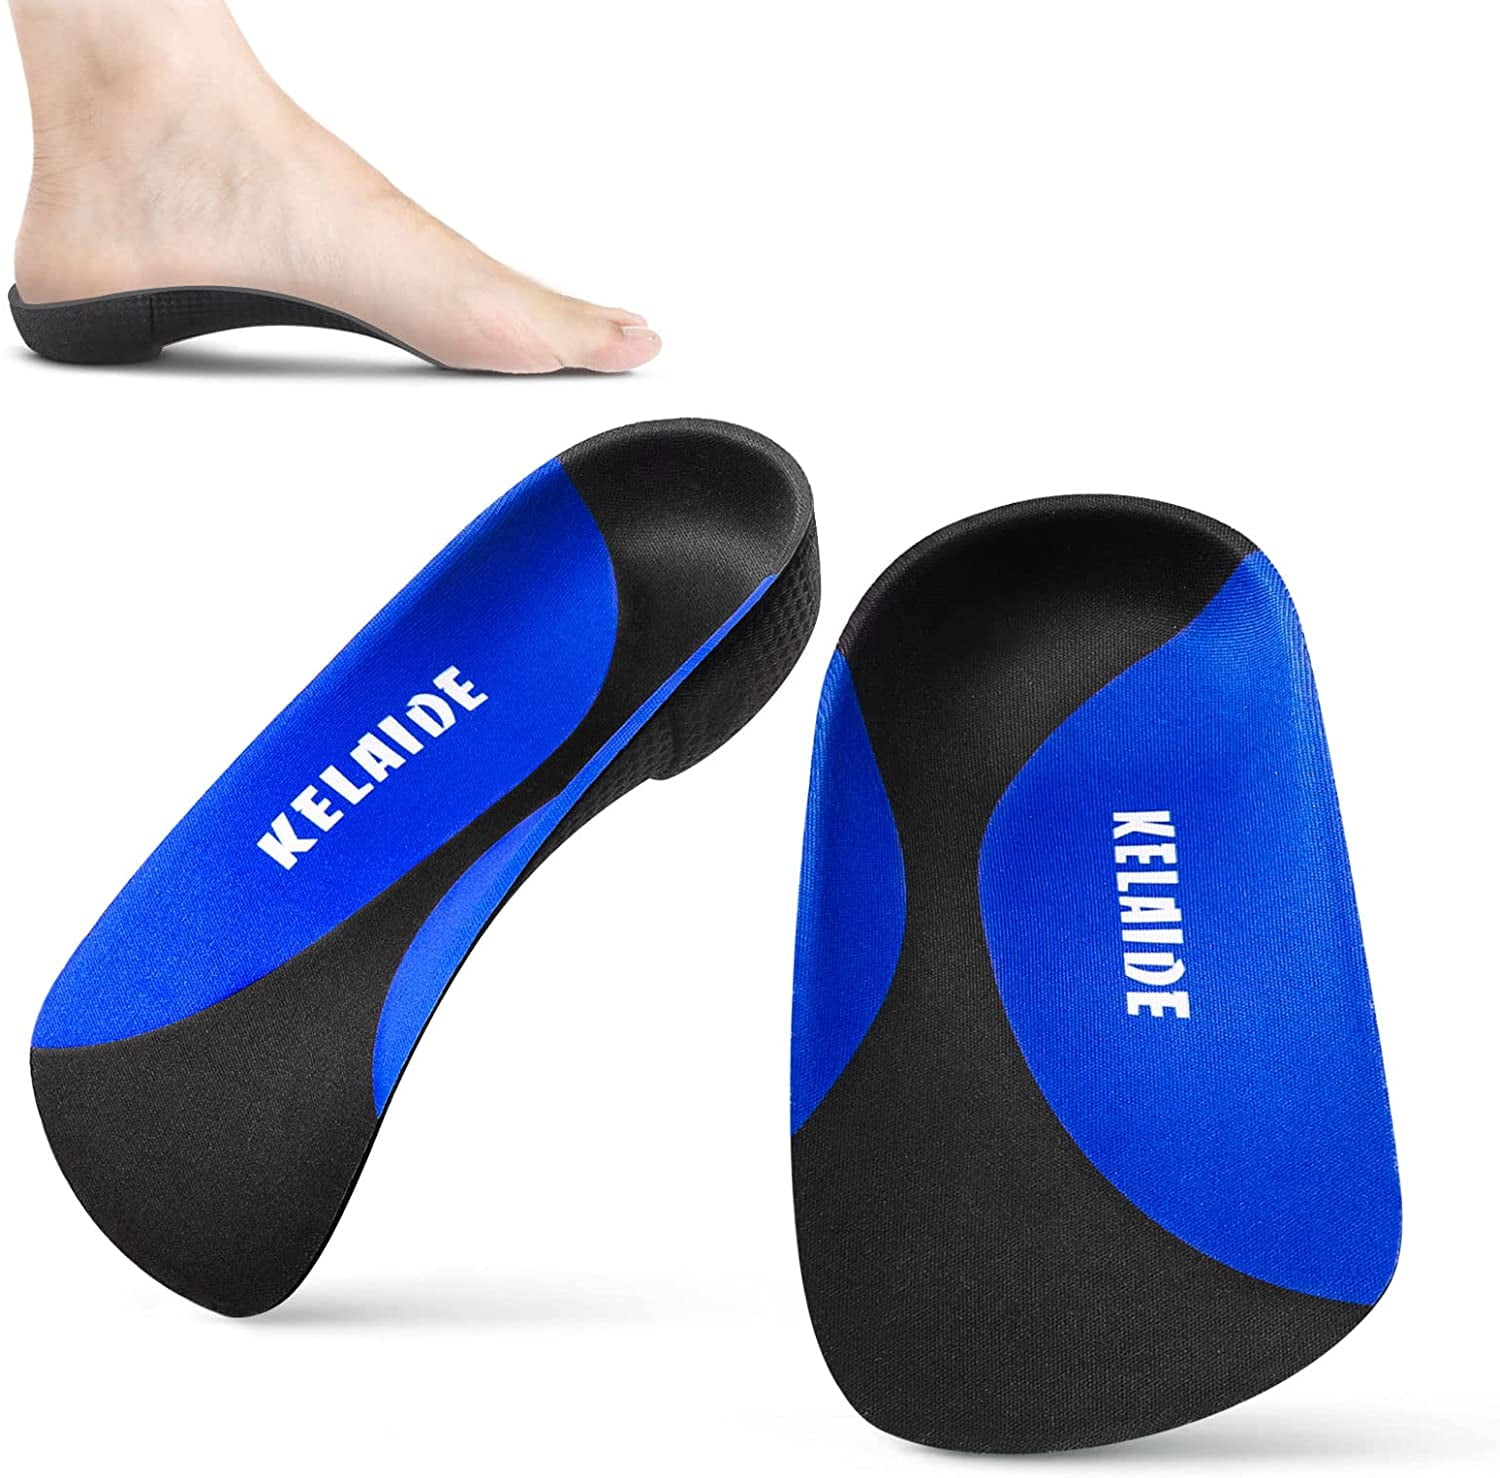 3/4 Orthotics Insoles With Arch Support-High Quality Cushioning Shoe Inserts for Plantar Fasciitis,Flat Feetfor Men&Women 